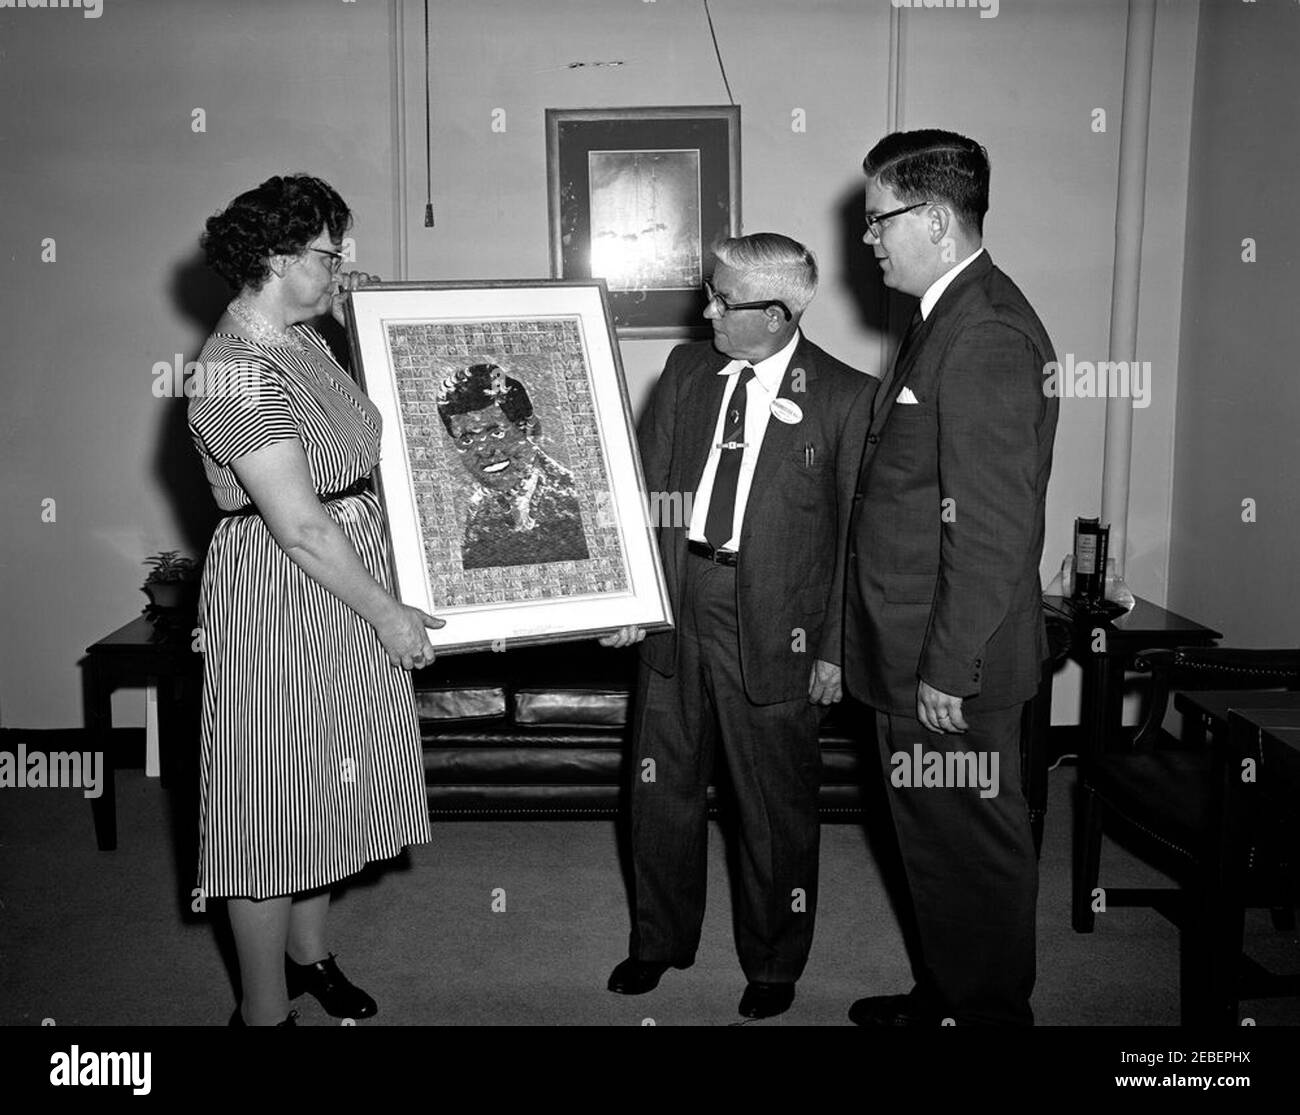 Mr. and Mrs. Jacob Blackburn of Baltimore, Maryland present a portrait of President Kennedy to Presidential Assistant John J. McNally. Dora and Jacob Blackburn of Baltimore, Maryland present a portrait of President John F. Kennedy made of ribbon and postage stamps to Presidential Assistant John J. u201cJacku201d McNally (far right). East Wing, White House, Washington, D.C. [The portrait is currently located at the John F. Kennedy Presidential Library and Museum as MO 63.292] Stock Photo